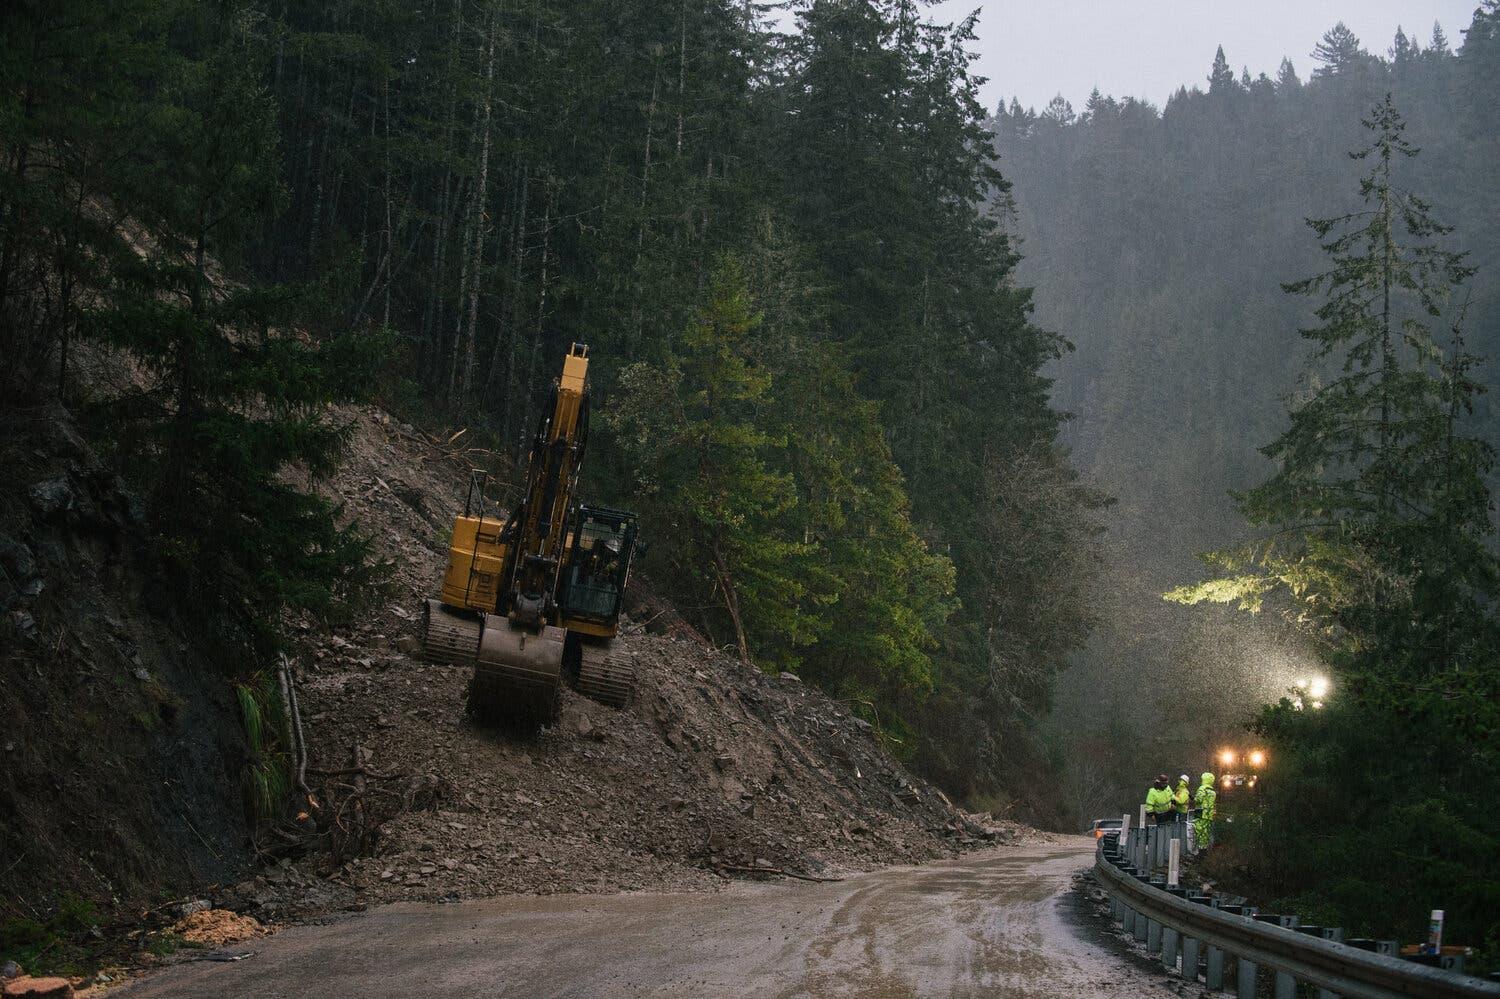 In a forested area, heavy construction equipment sits on a slope near a road containing debris.